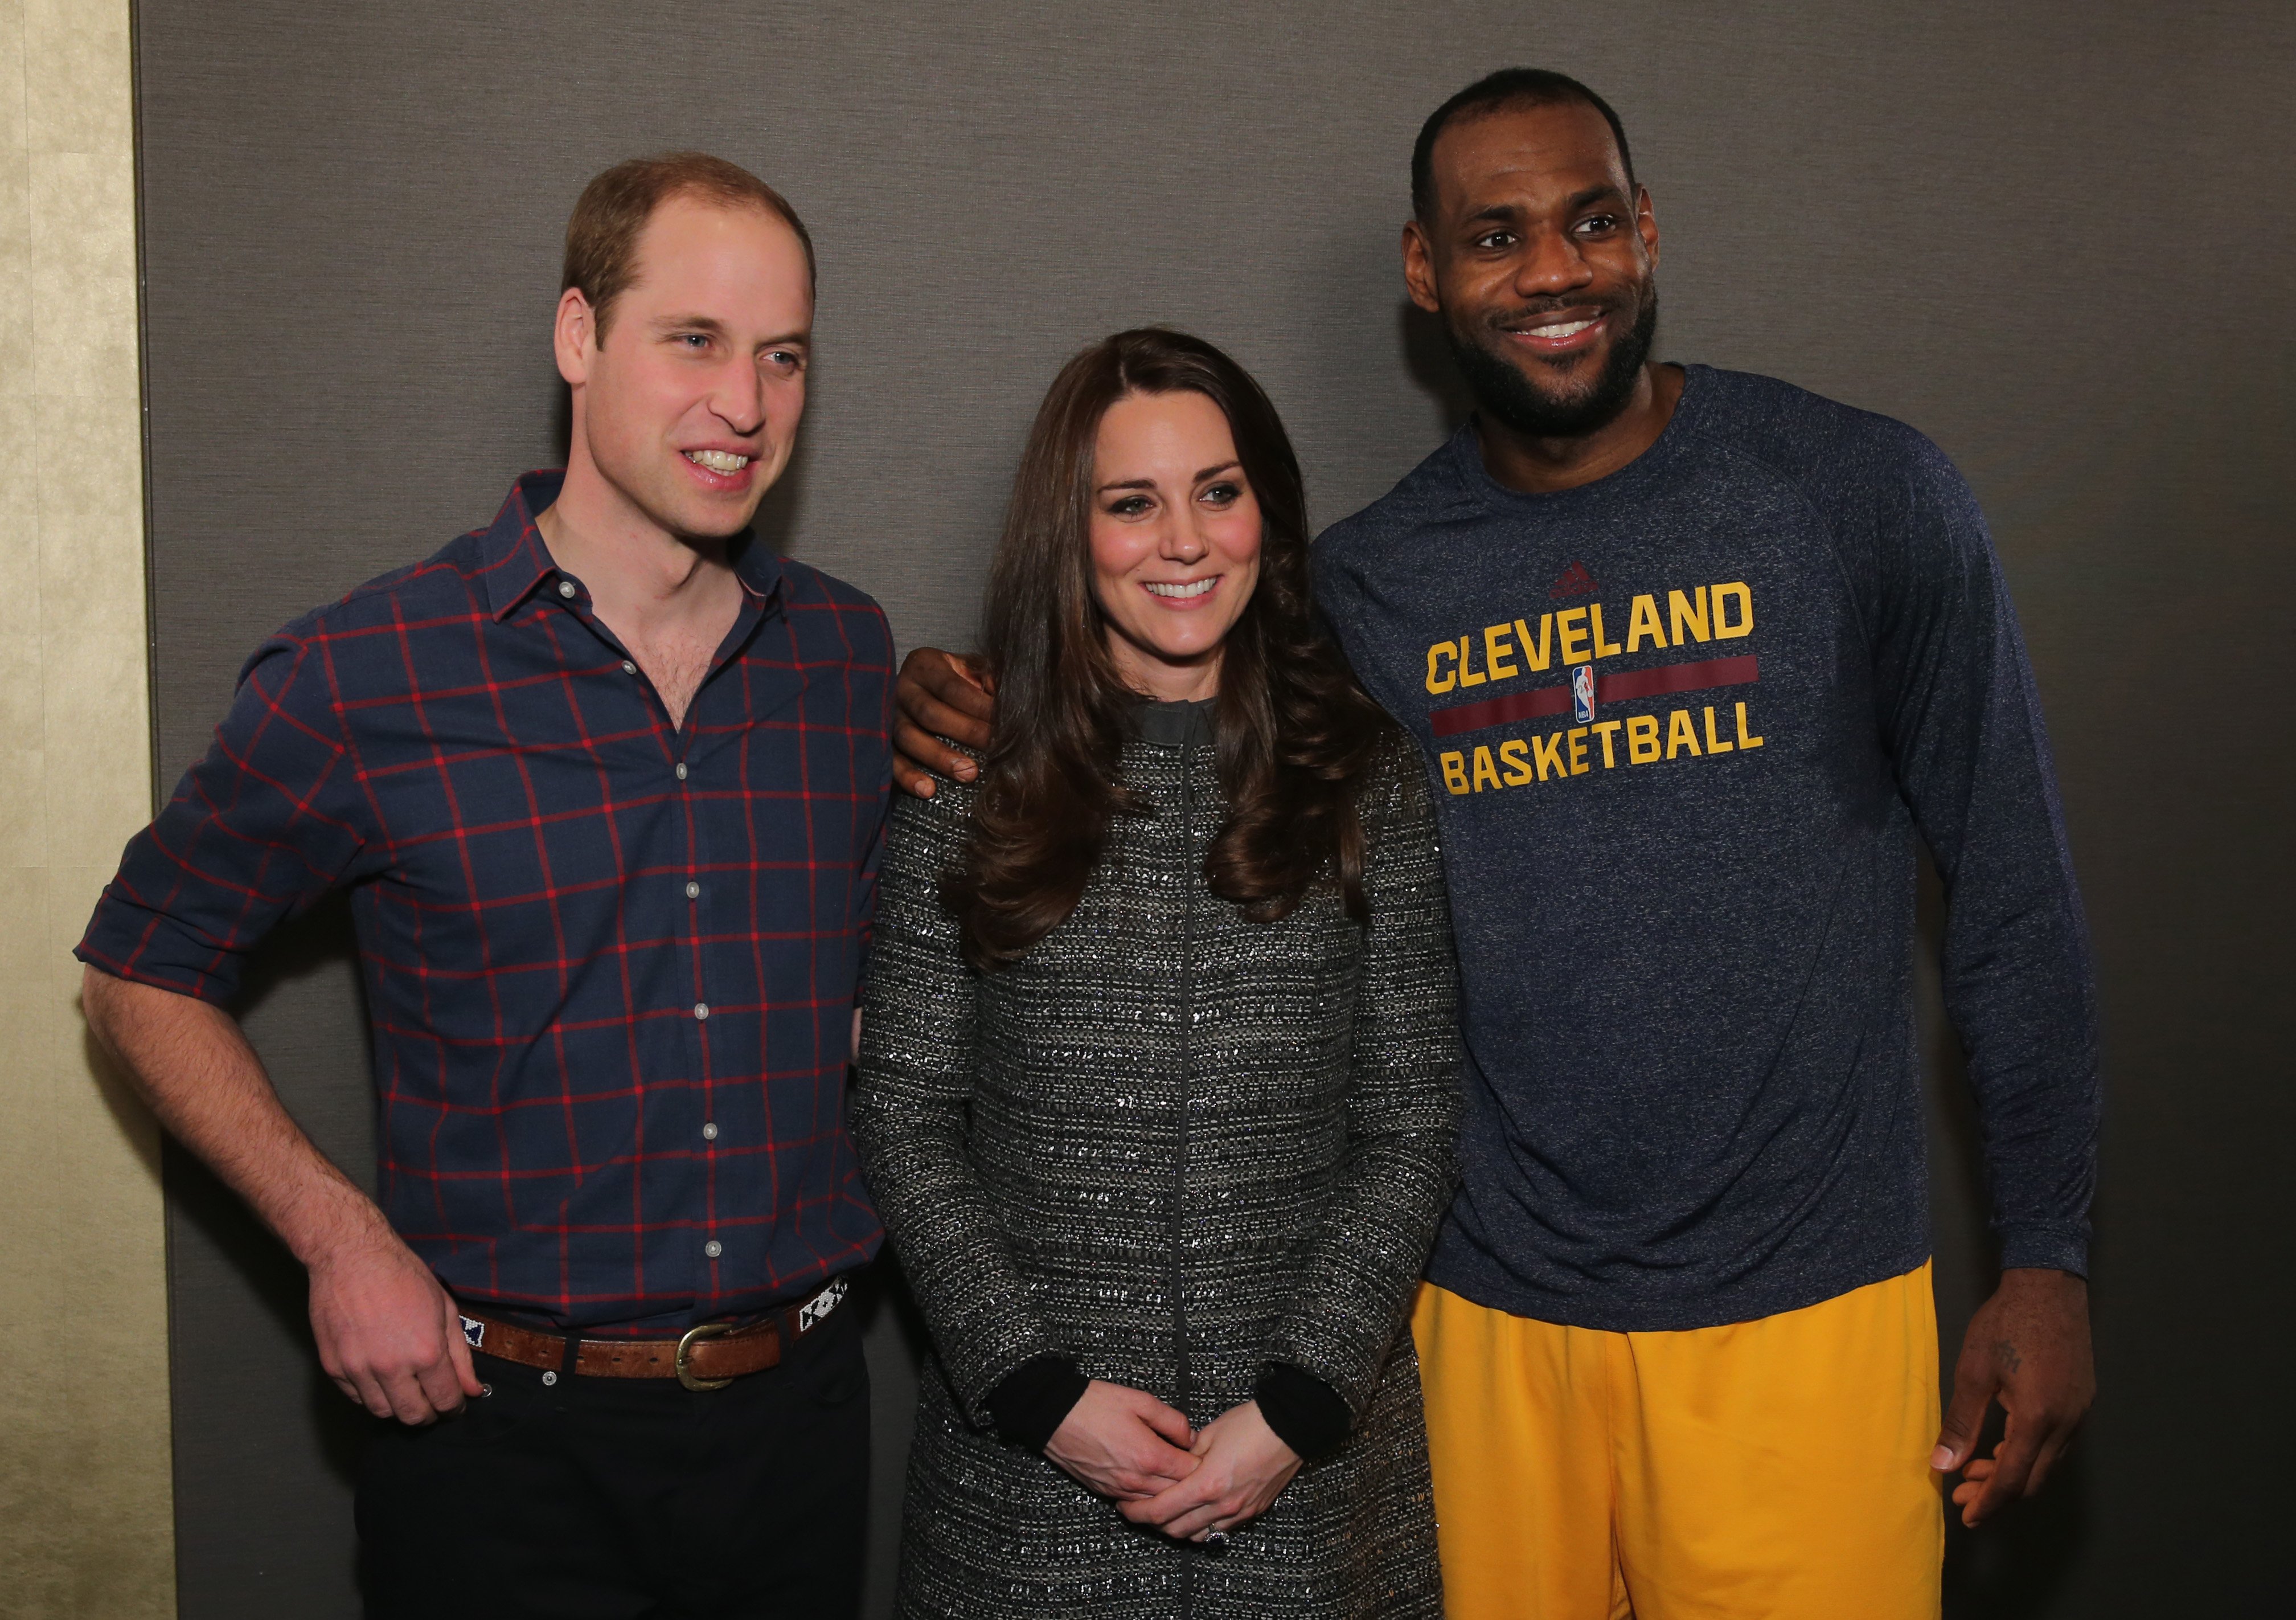 Prince William and Kate Middleton posing with basketball player LeBron James backstage as they attend the Cleveland Cavaliers vs. Brooklyn Nets game at Barclays Center on December 8, 2014 in the Brooklyn borough of New York City ┃Source: Getty Images